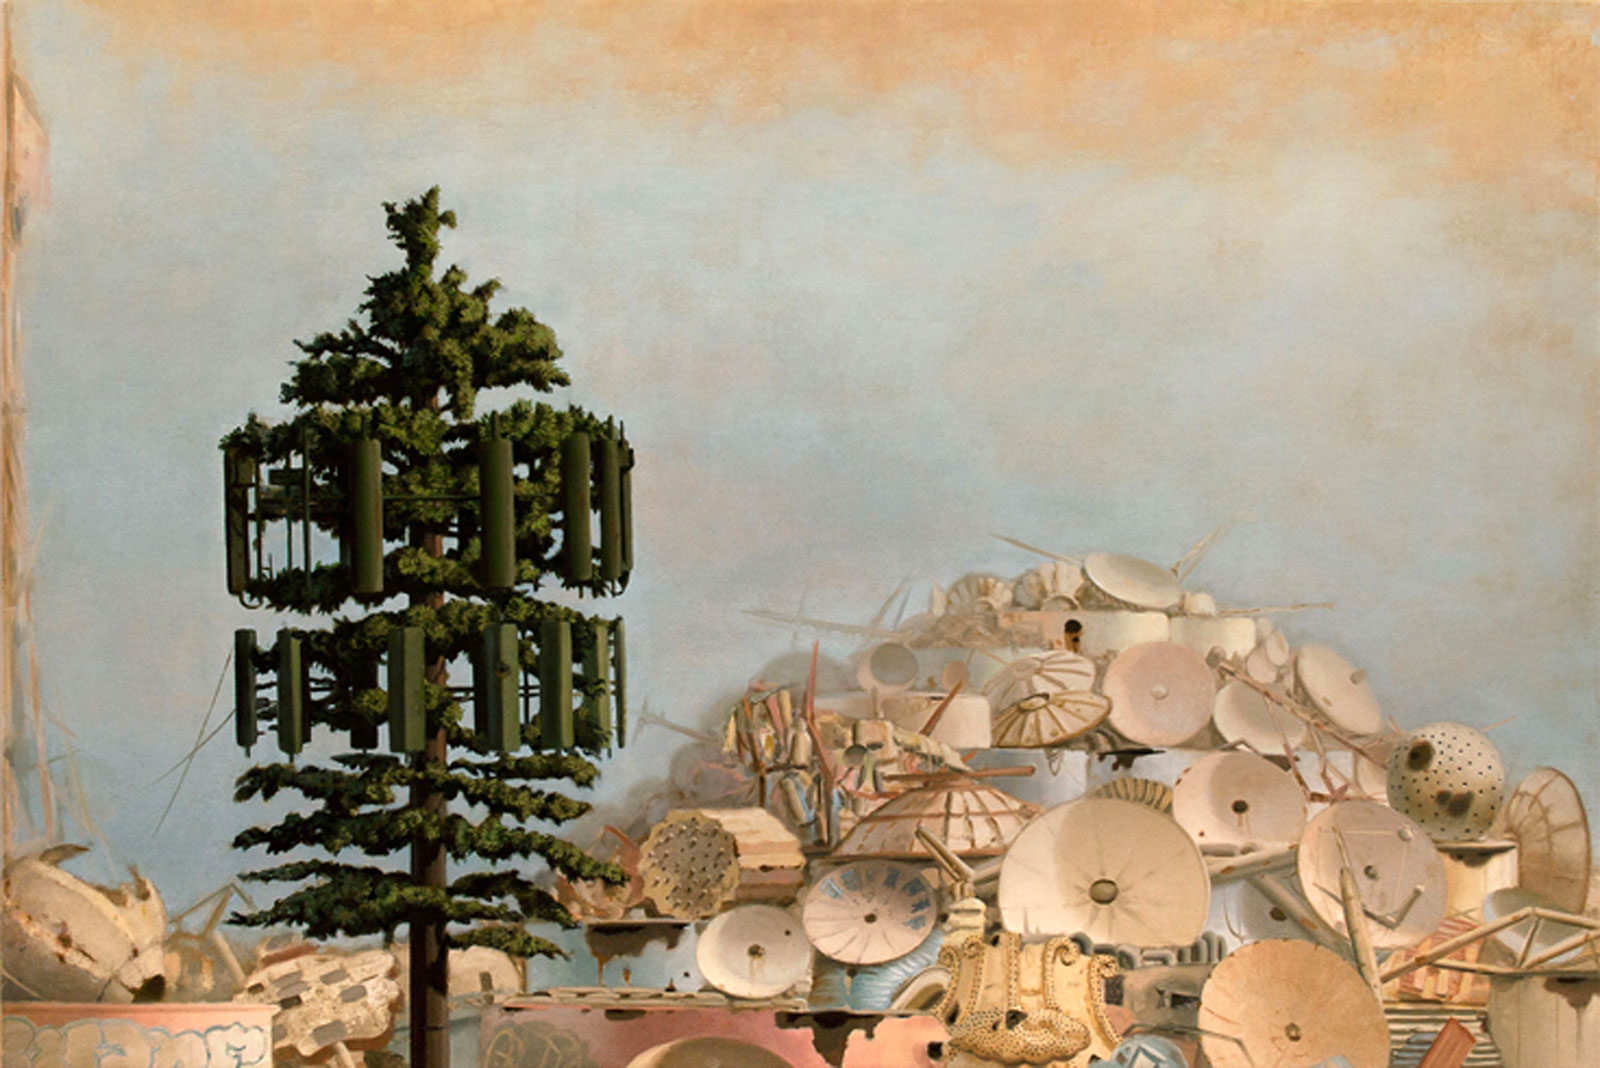 satellite dishes and celltower resembling a pine tree